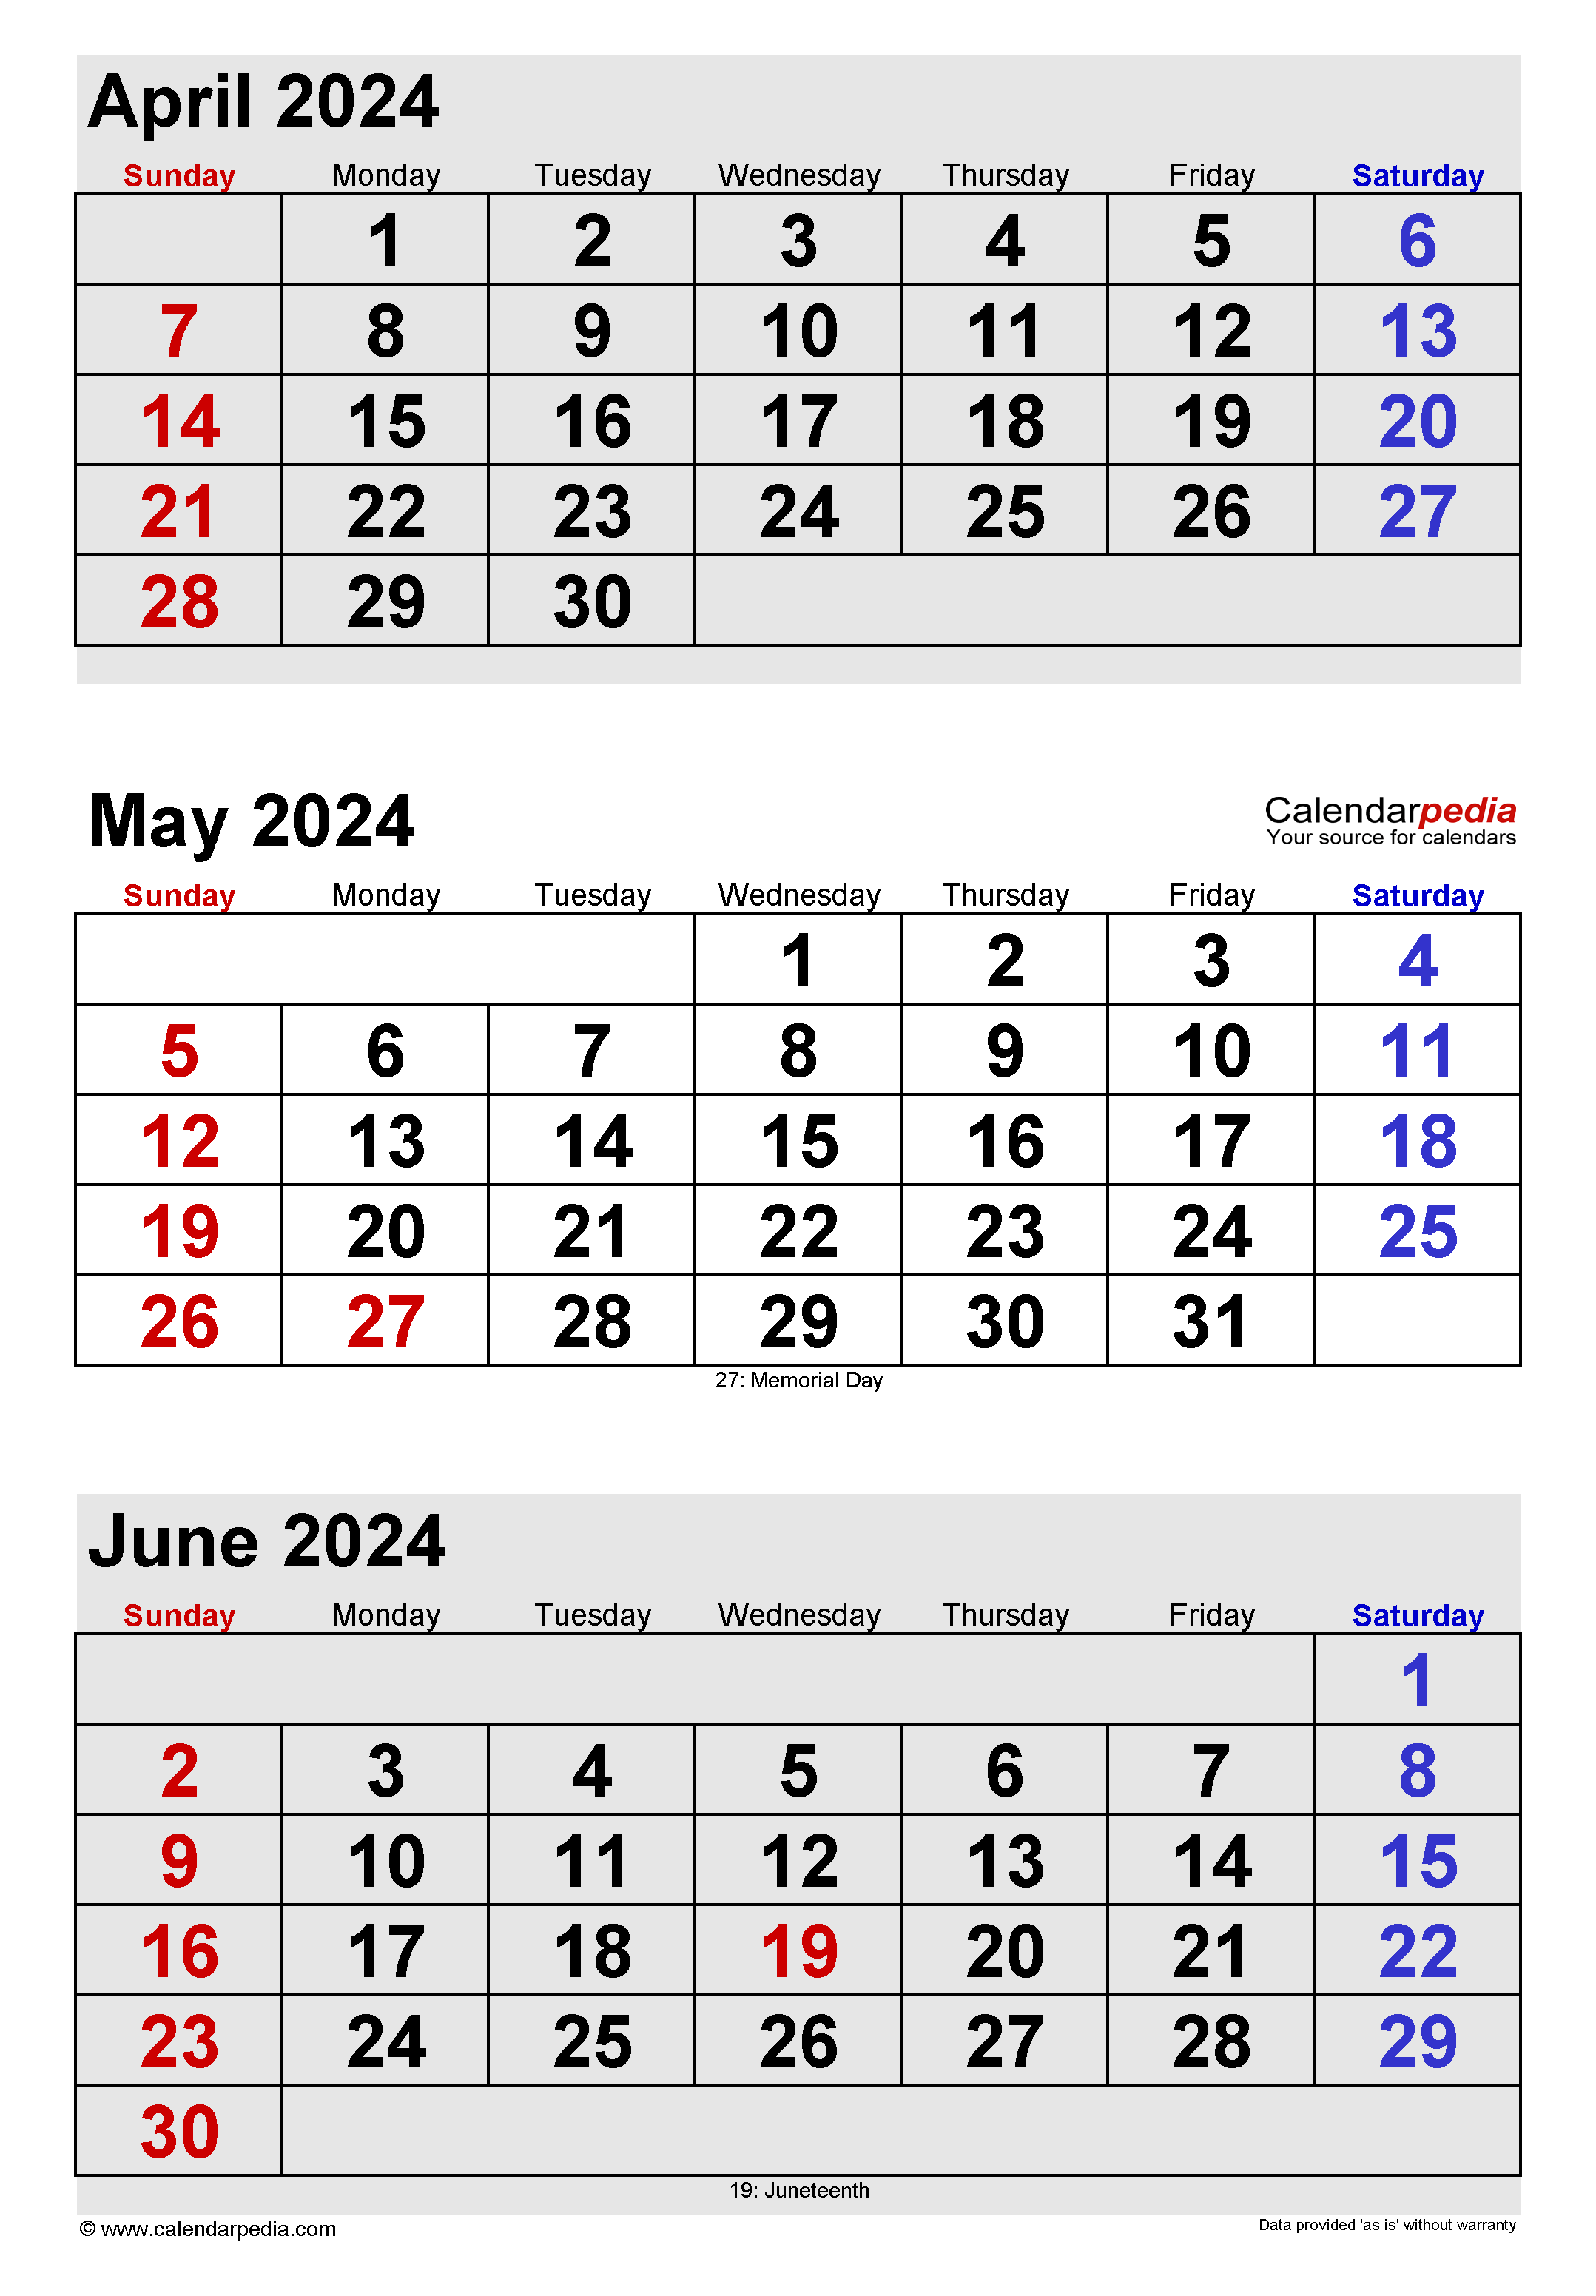 May 2024 Calendar | Templates For Word, Excel And Pdf with regard to April May June Calendar 2024